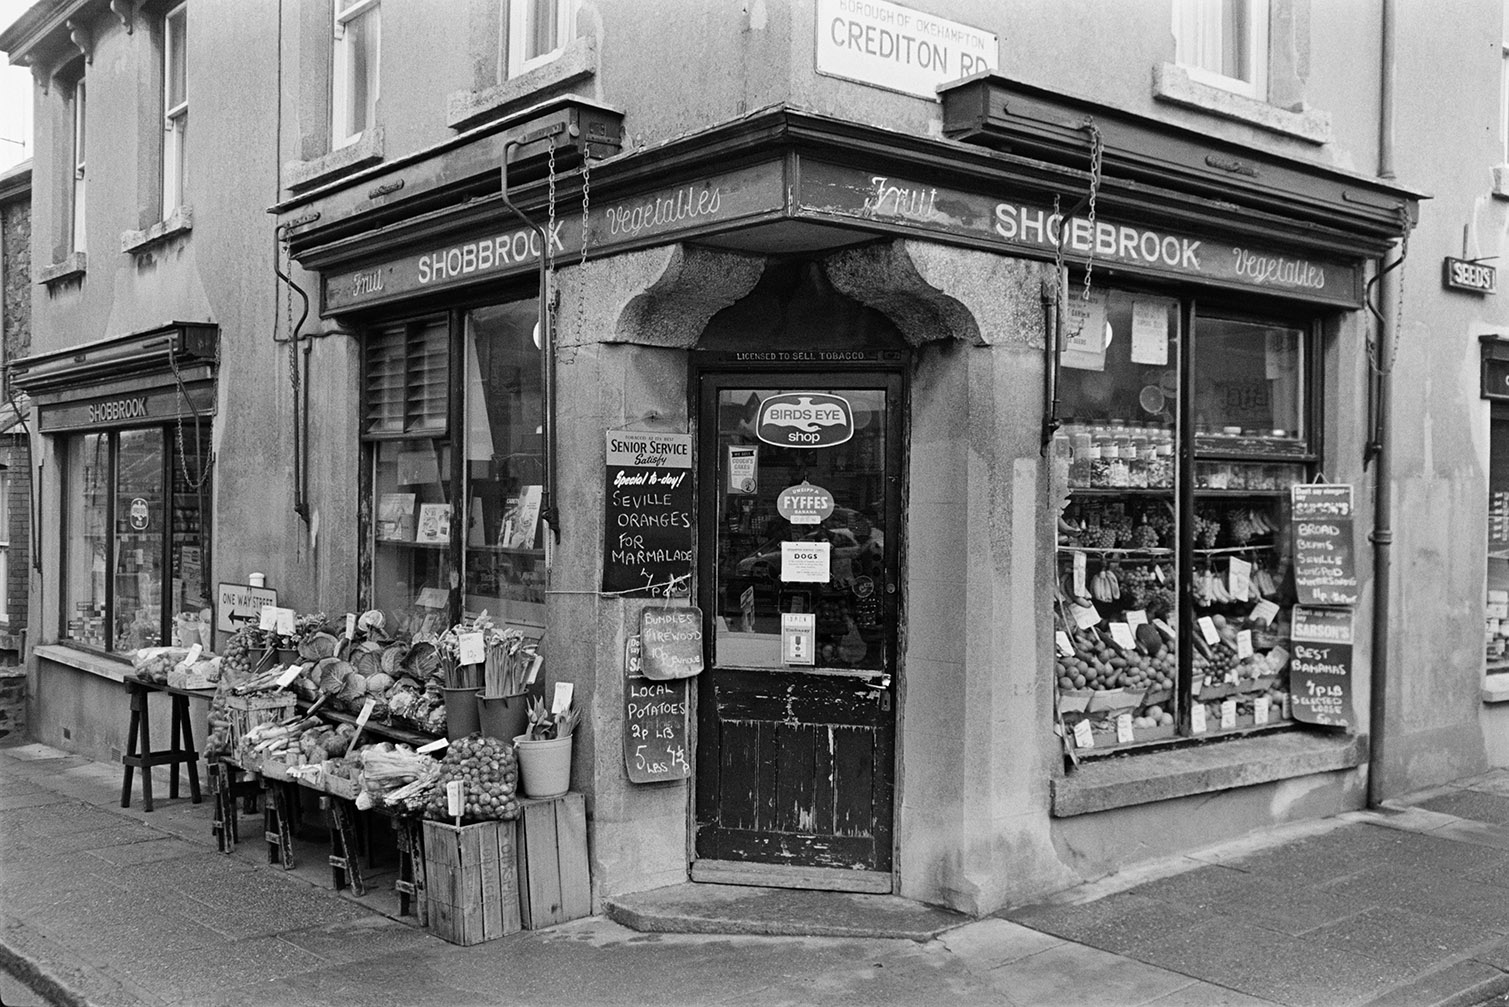 The Shop front window and display of Shobbrook fruit and vegetable corner shop on Crediton Road in Okehampton. Produce, including cabbages, daffodils and swedes, is on display outside the shop. More fruit and vegetables are displayed inside the shop window and two signs by the doorway are advertising Seville oranges and local potatoes.